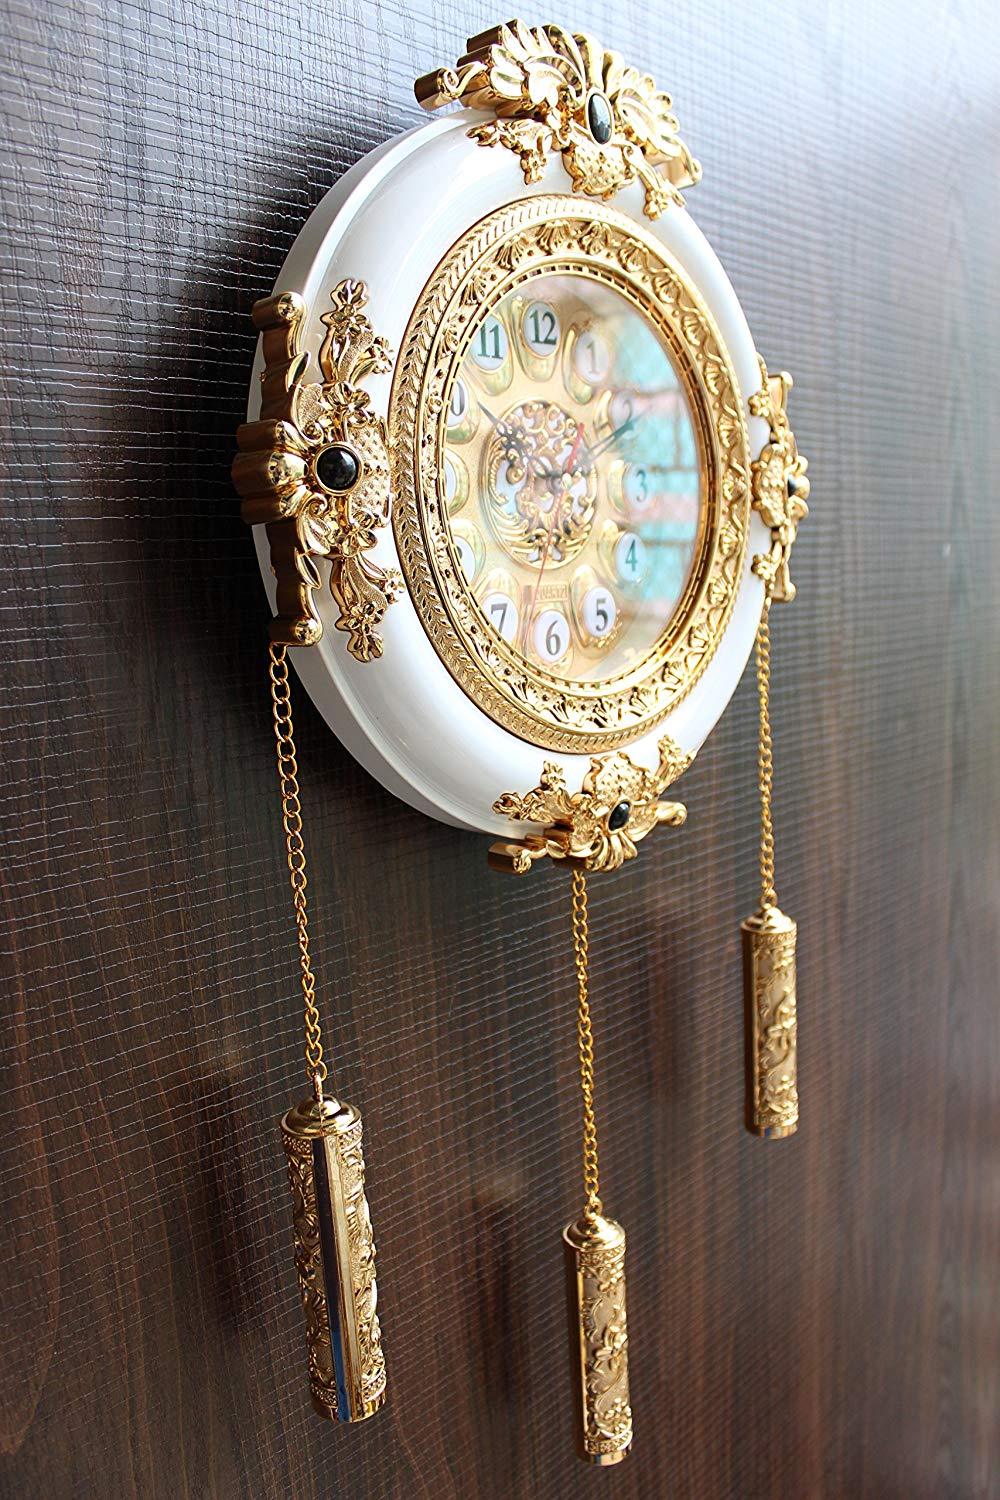 FunkyTradition Royal Designer Gold Plated White Premium String Hanging Wall Clock for Home Office Decor 55 cm Tall